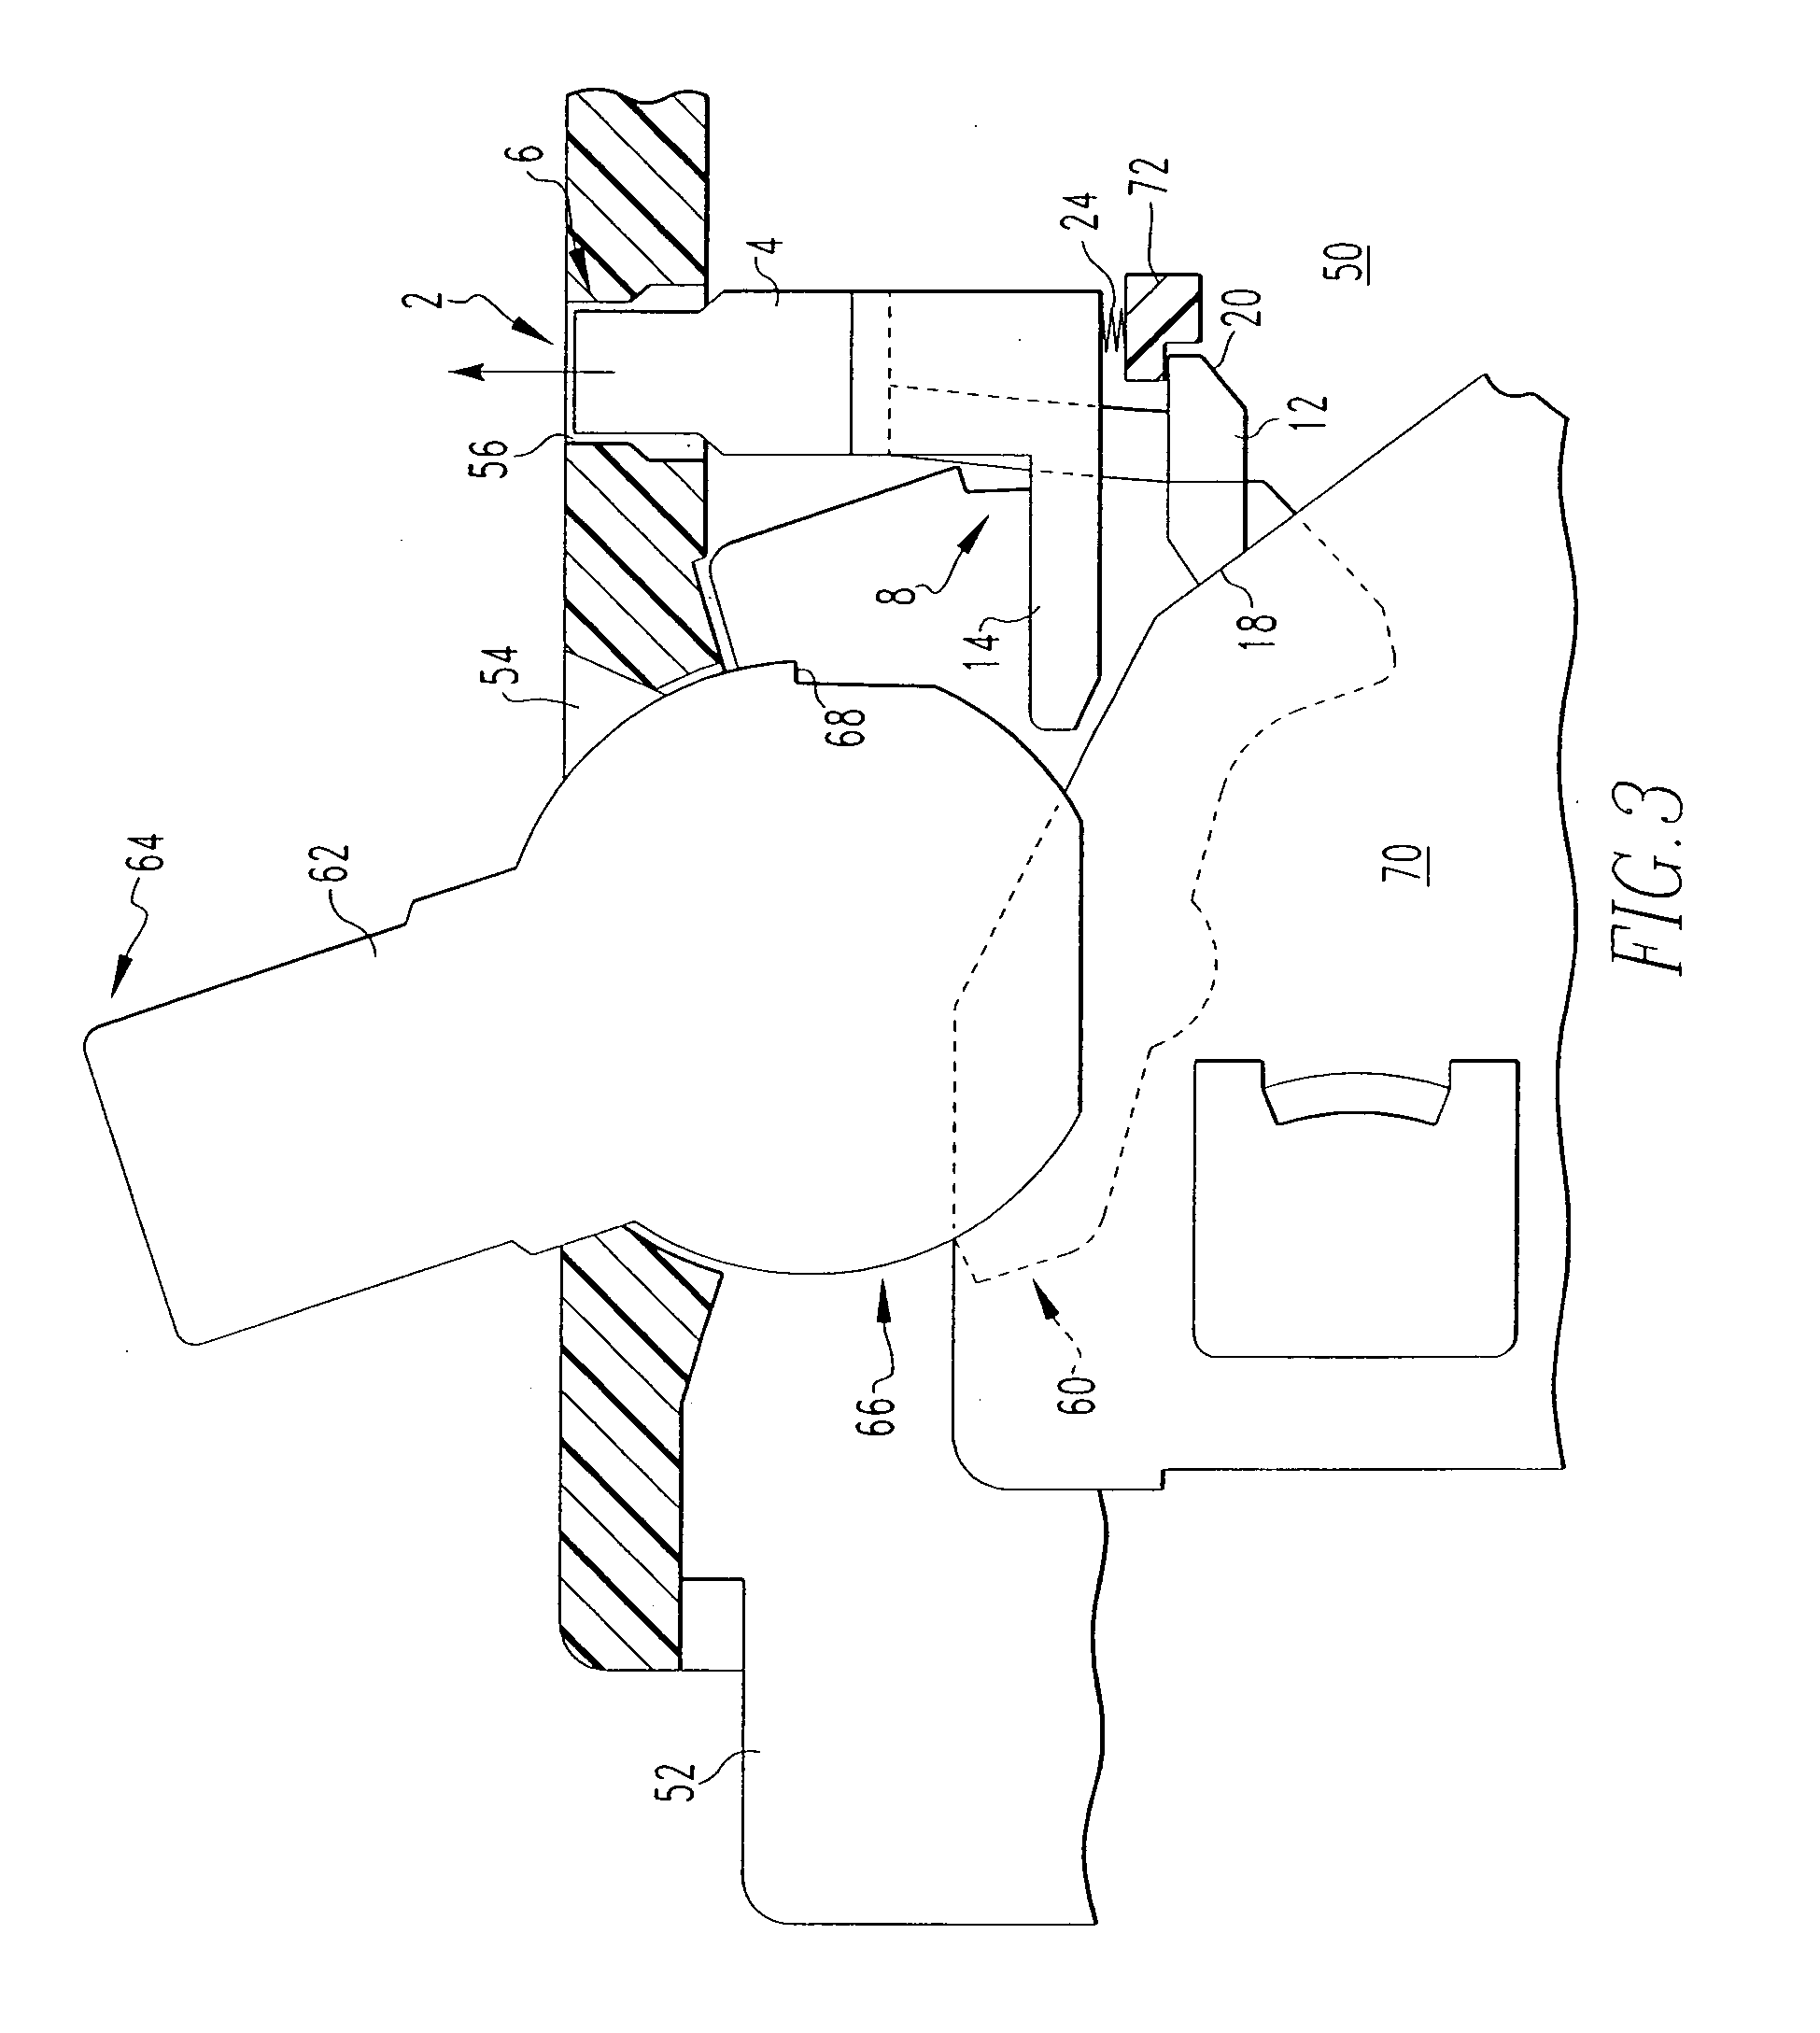 Trip indicator and electrical switching apparatus employing the same